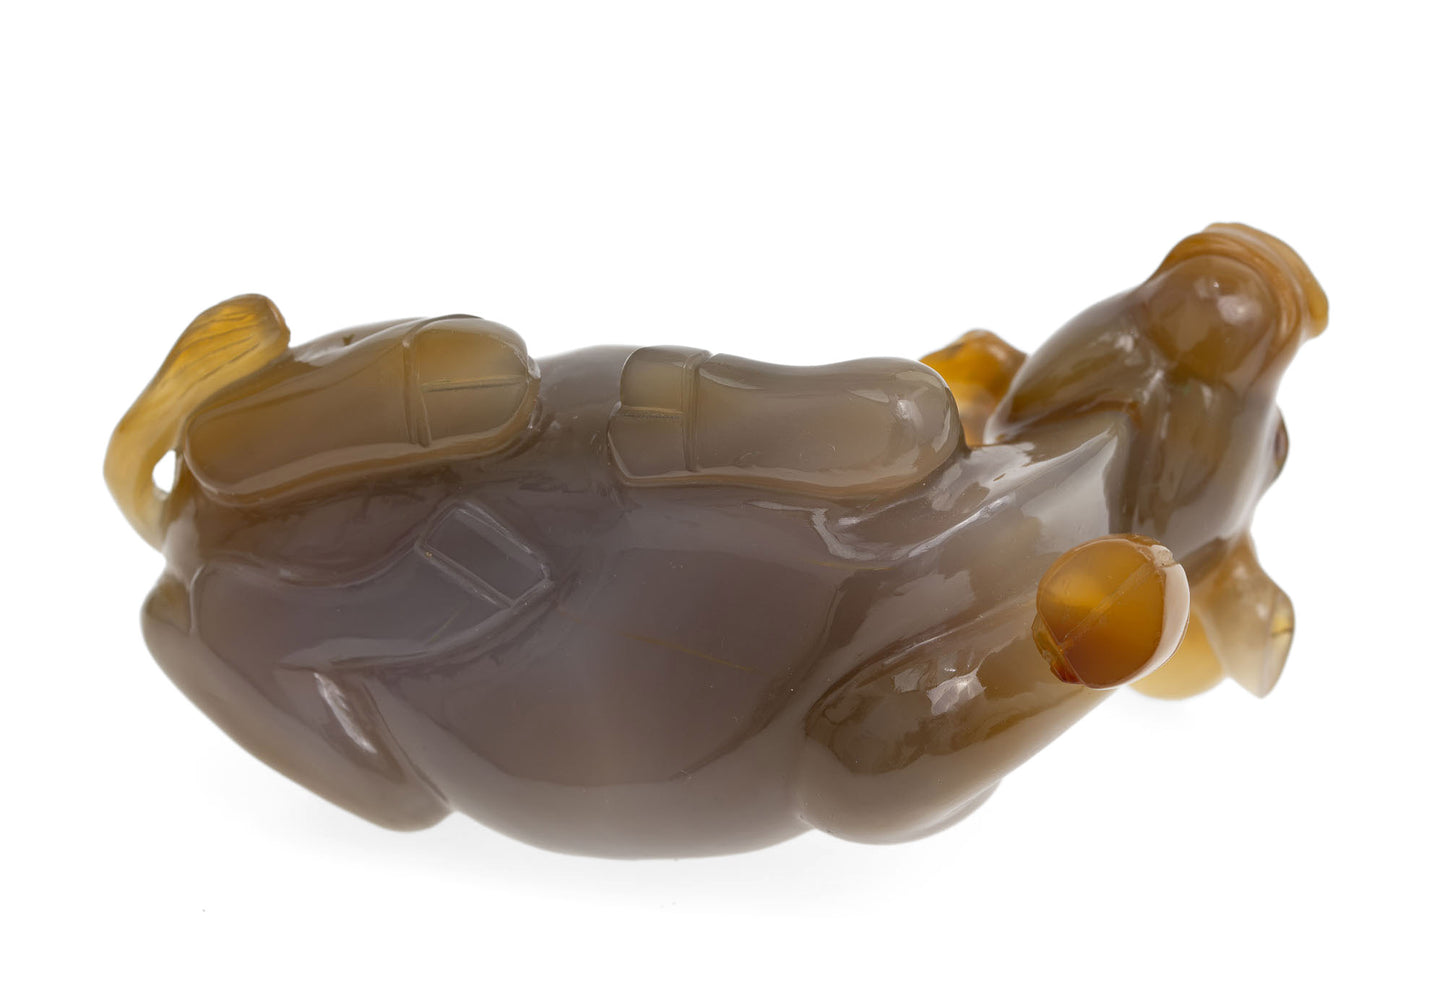 Chinese Republic Period Carved Chalcedony/Agate Figure of a Water Buffalo Lying (2932)